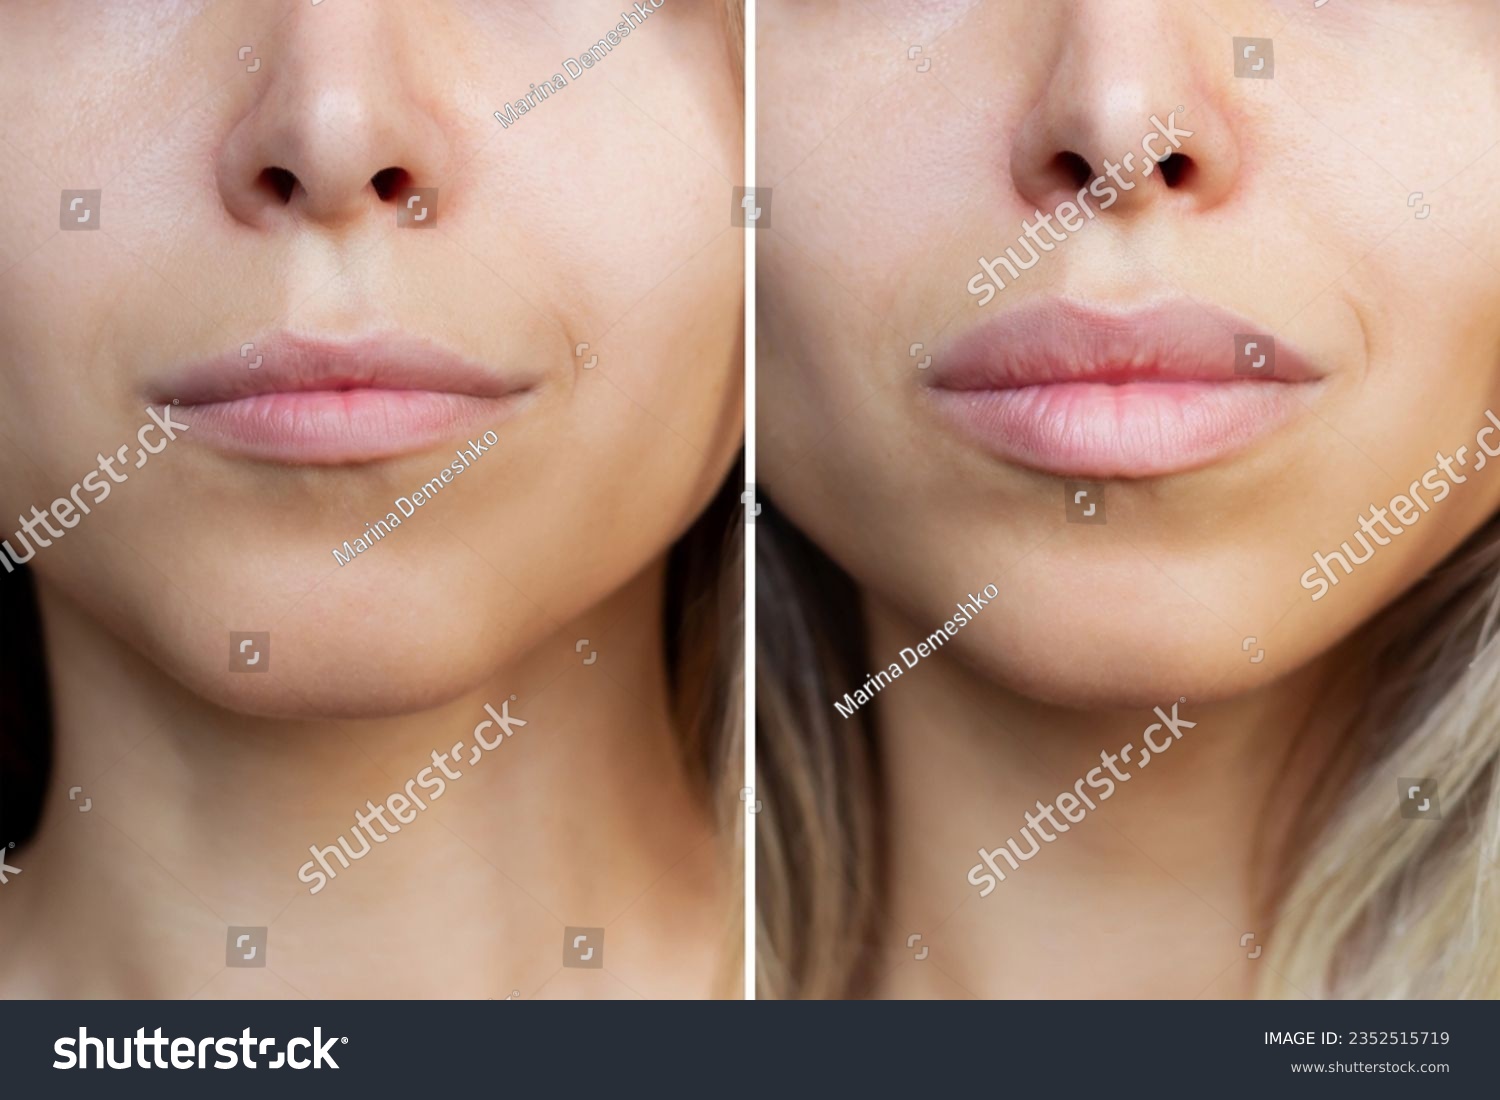 Result of lip augmentation. Cropped shot of young blonde woman's lower part of face with lips before and after lip enhancement. Injection of filler in lips. Difference, comparison #2352515719